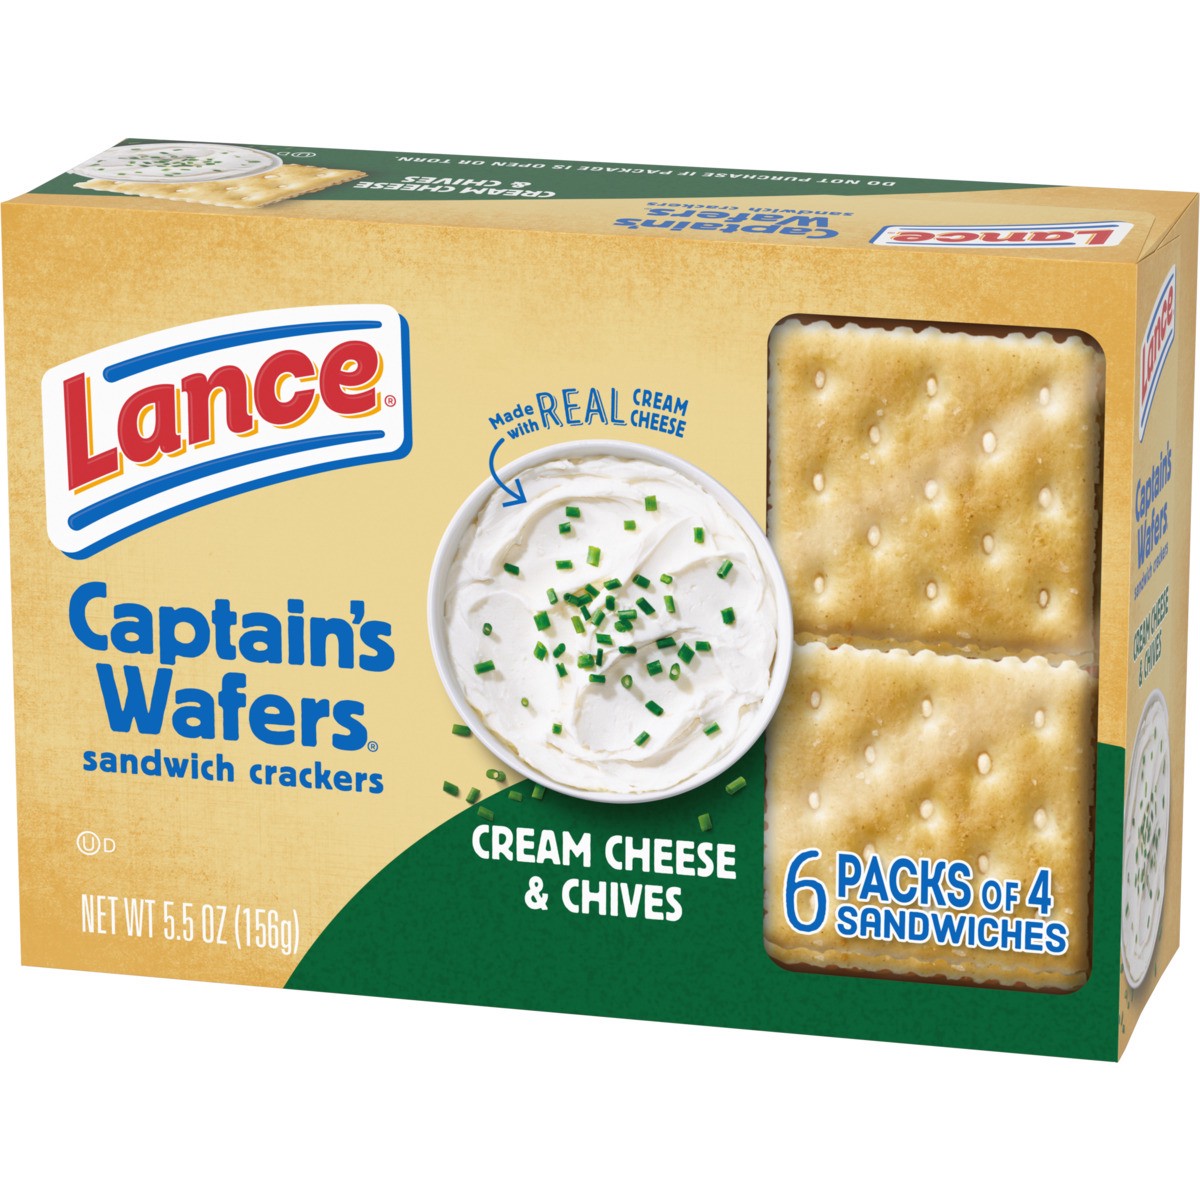 slide 7 of 11, Lance Sandwich Crackers, Captain's Wafers Cream Cheese and Chives, 6 Packs, 4 Sandwiches Each, 5.5 oz